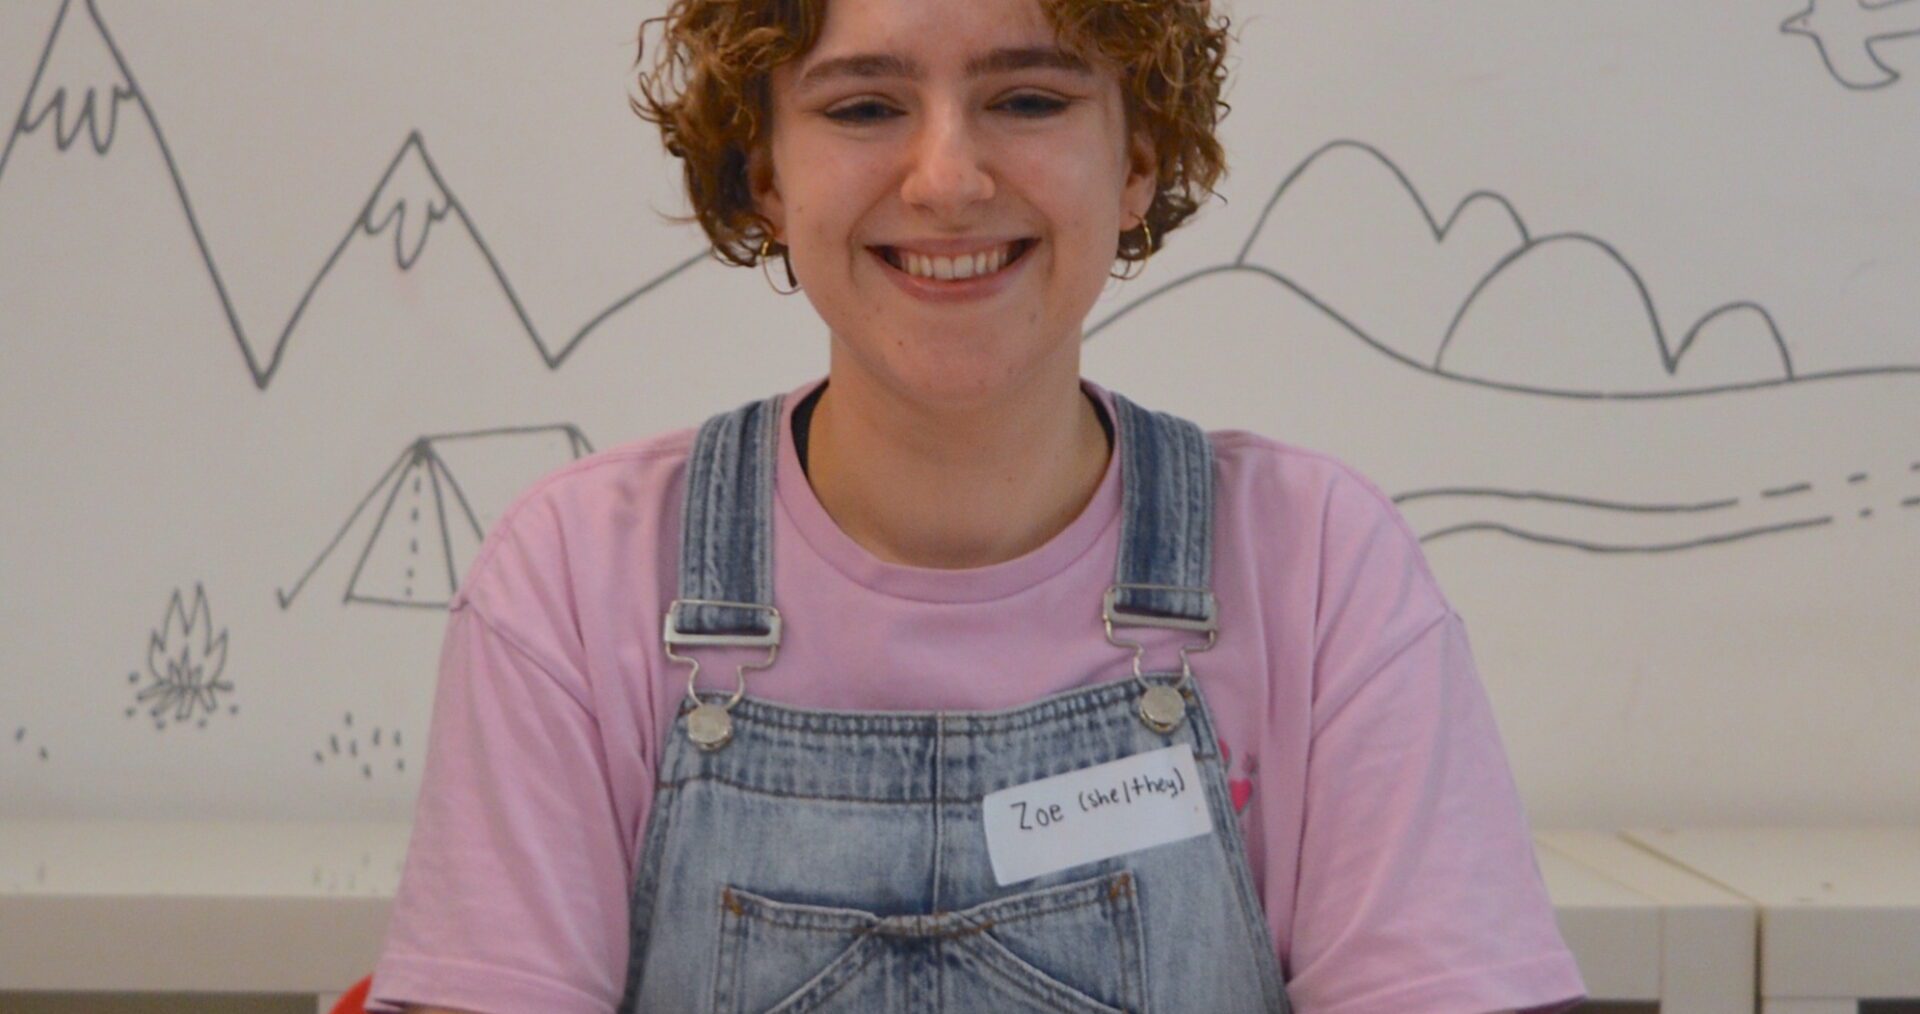 Zoe sits with their hands clasped smiling at the camera. She is a white woman with short curly hair, gold hoop earrings and a watch on her right wrist. They are wearing a lilac purple t-shirt and light blue denim dungarees.